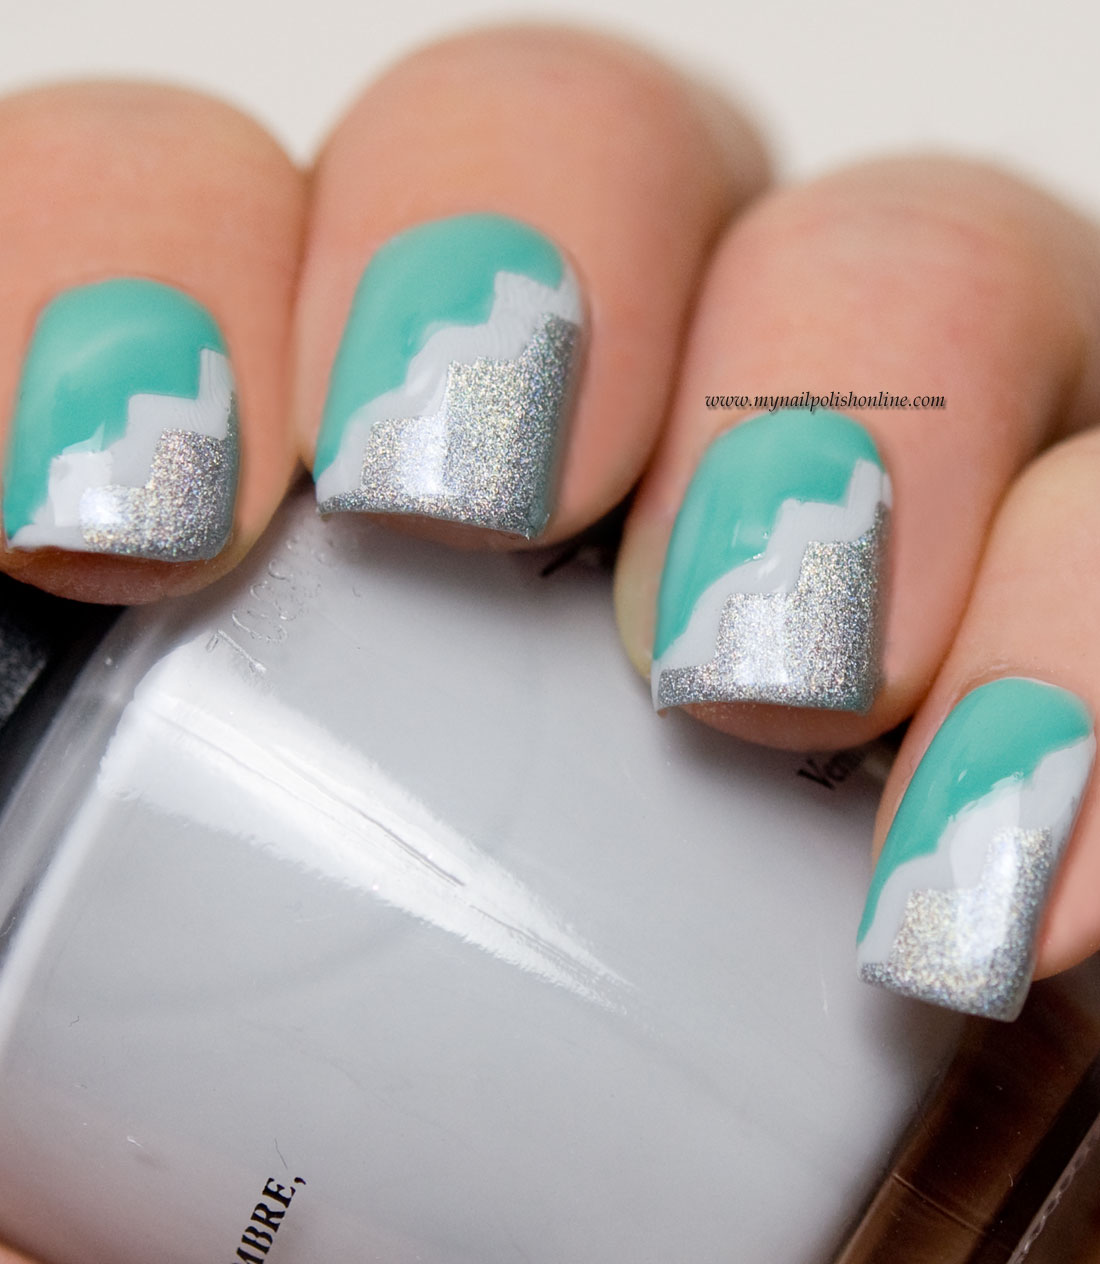 Nail Art with tape manicure